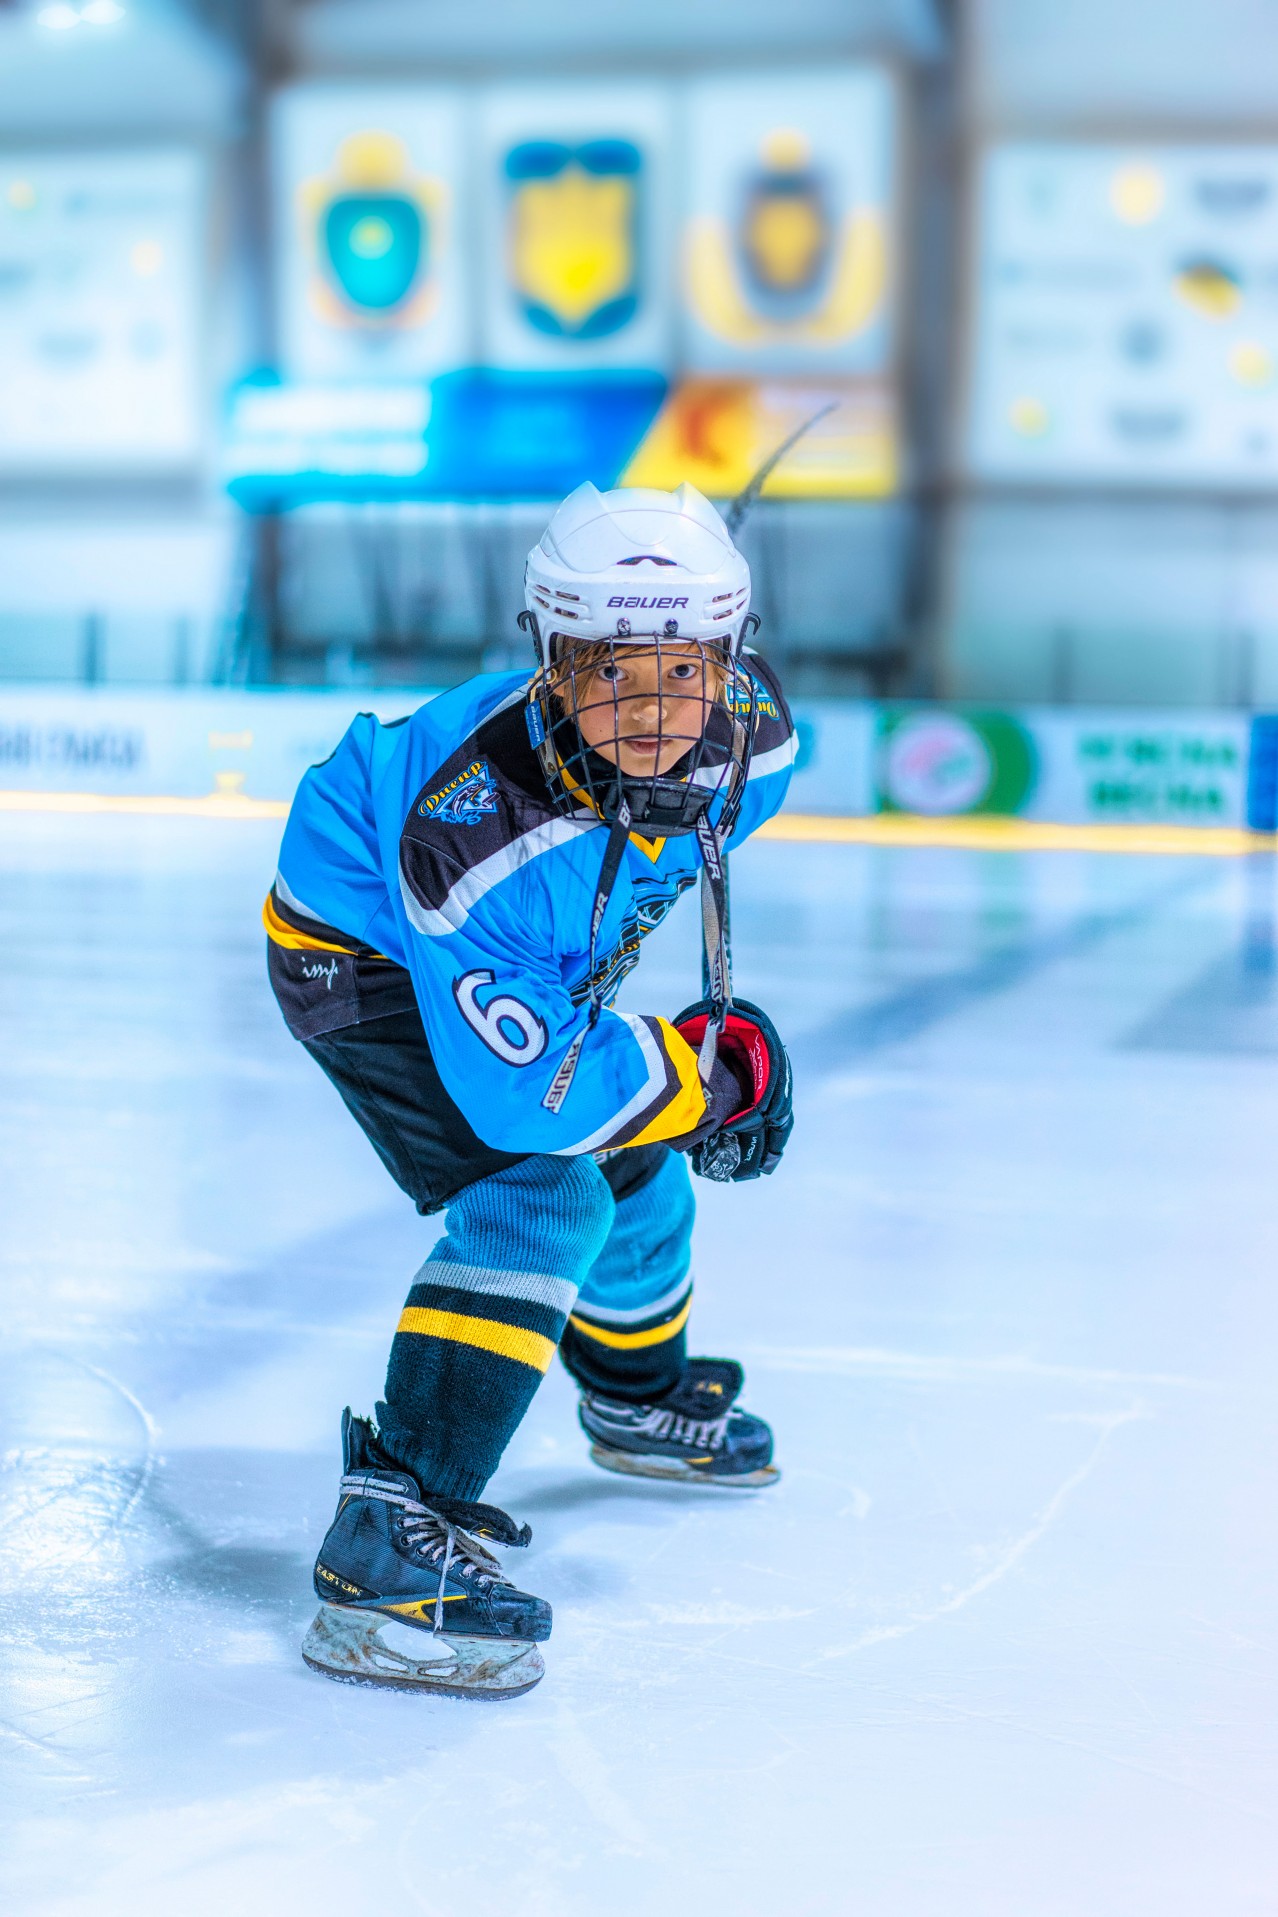 Hockey Player in Special Clothes on Ice-rink